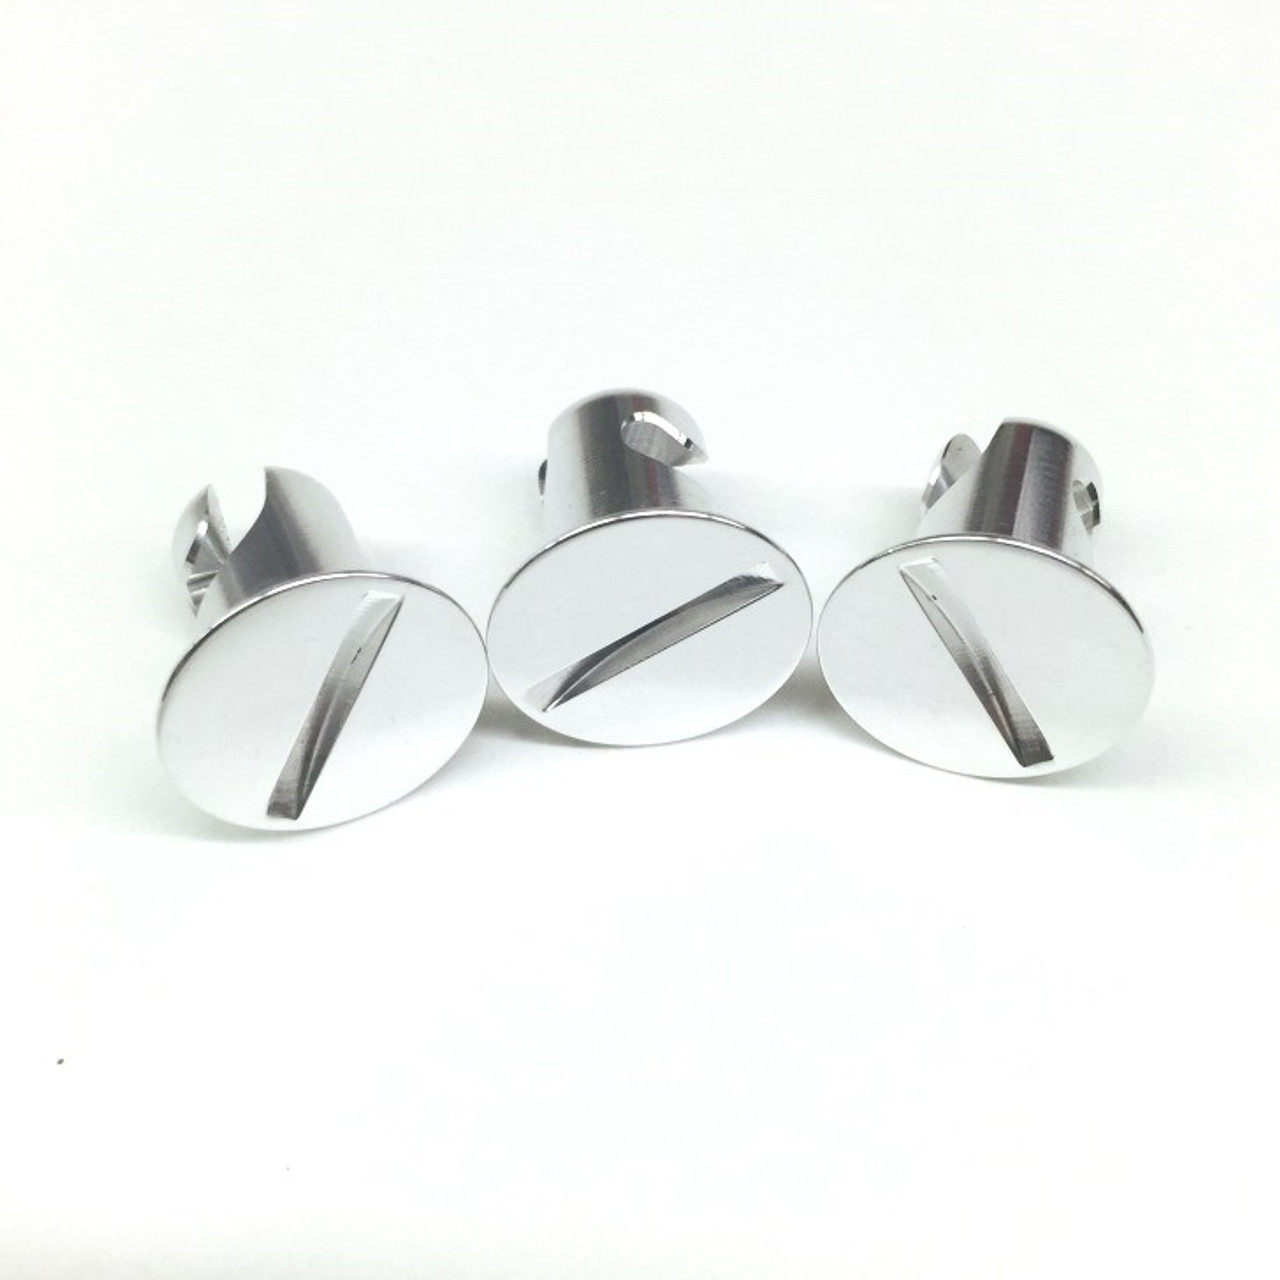 .400 long polished slotted flat head quarter turn DZUS button fasteners